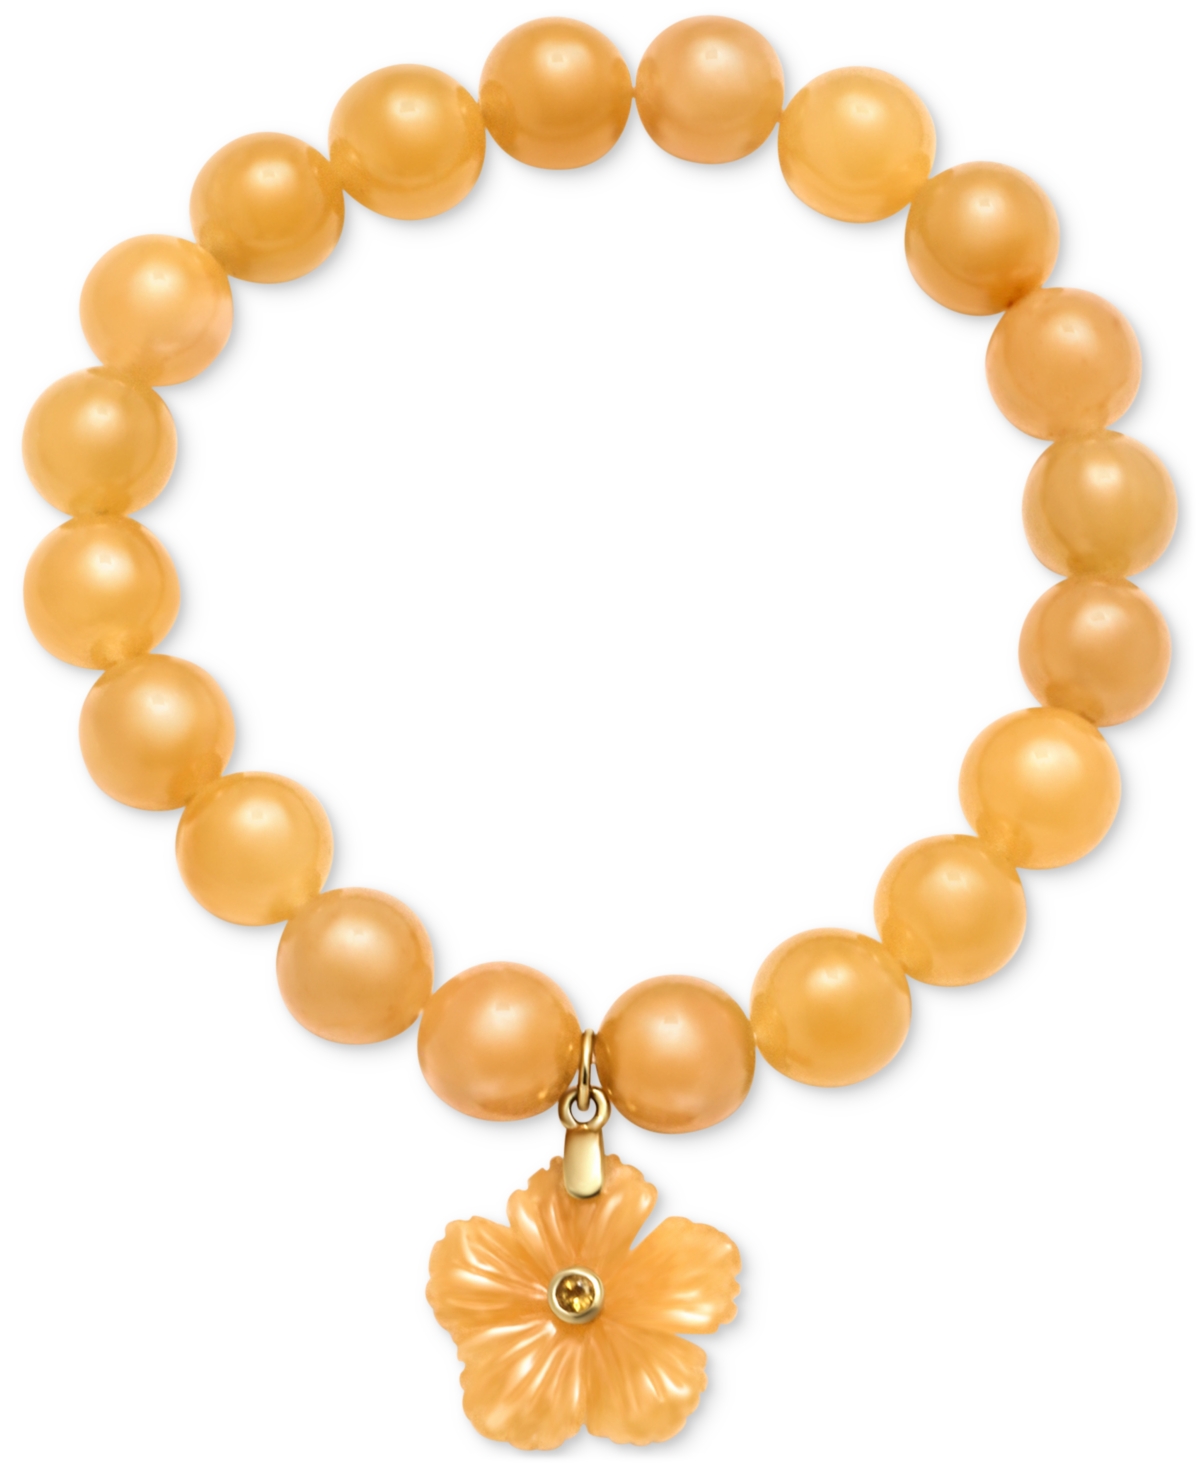 Dyed Yellow Jade & Citrine (1/10 ct. t.w.) Flower Dangle Beaded Stretch Bracelet (Also in Dyed Lavender Jade/Citrine and Green Jade/Peridot) - Ginger